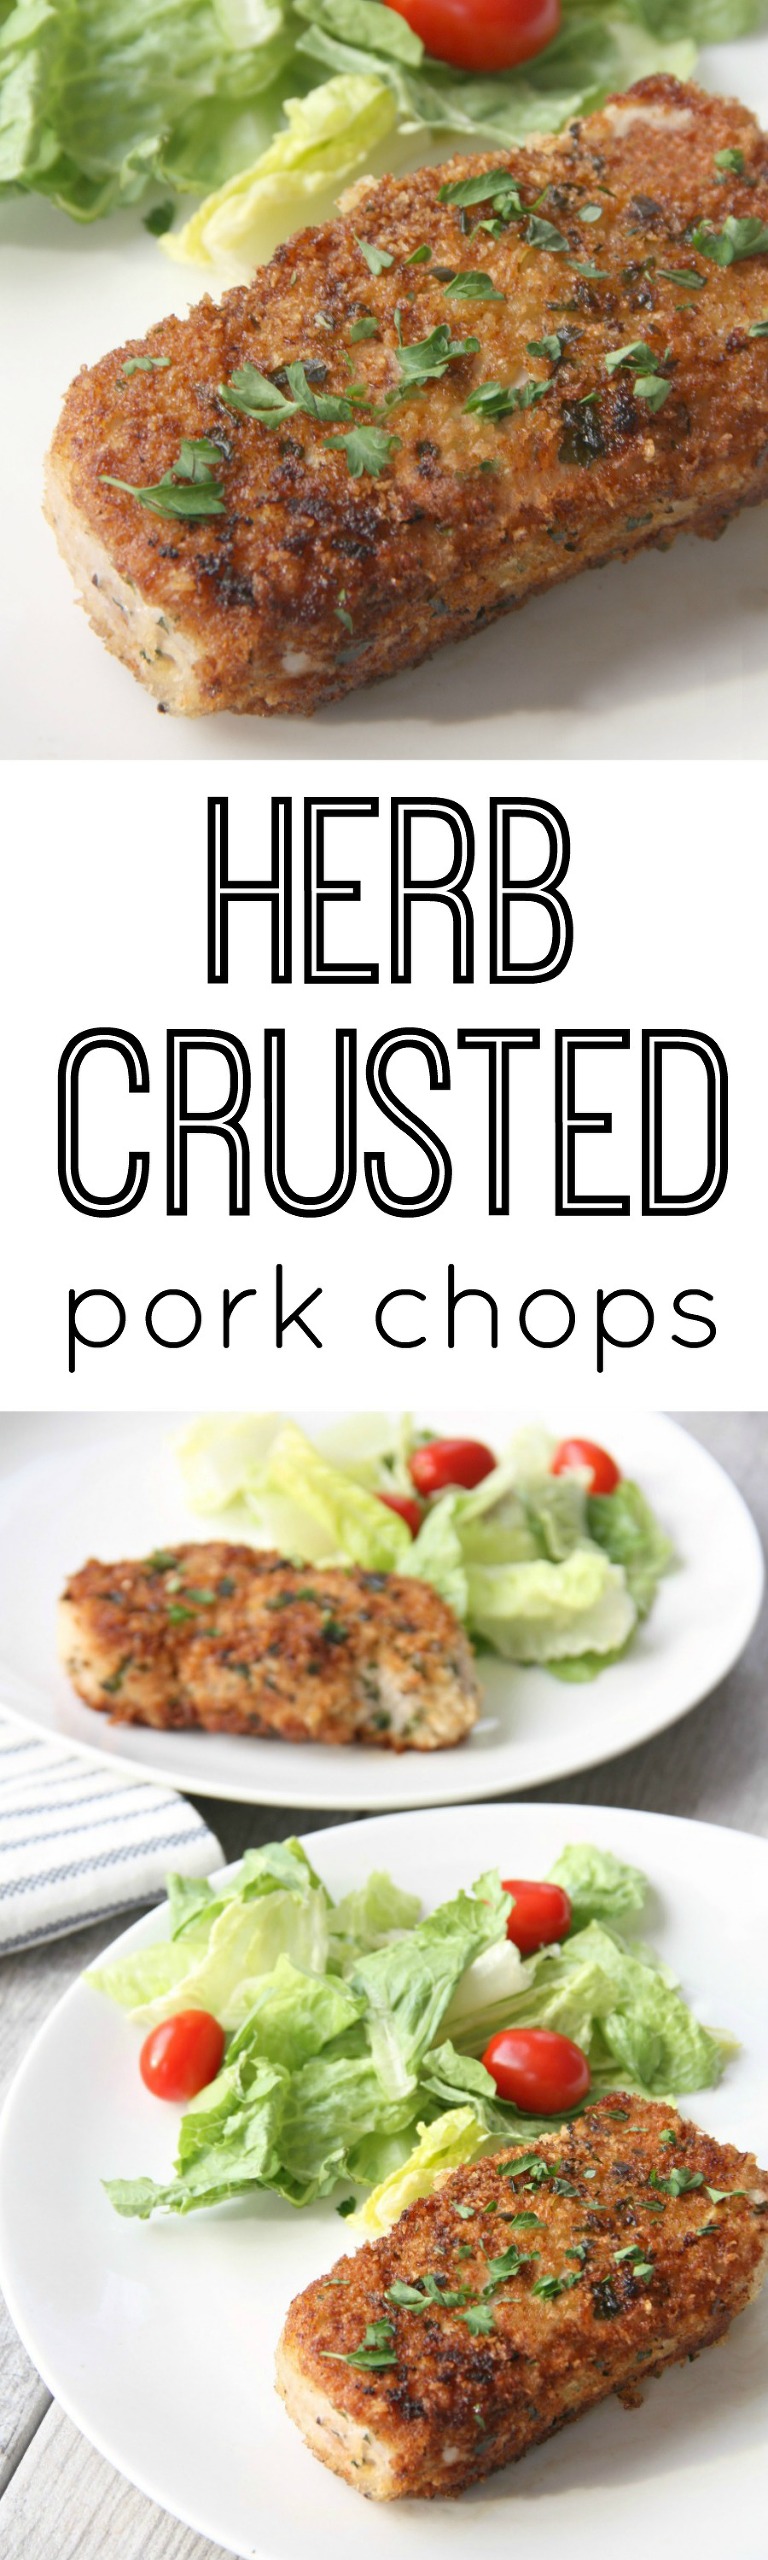 Delicious Herb Crusted pork chops